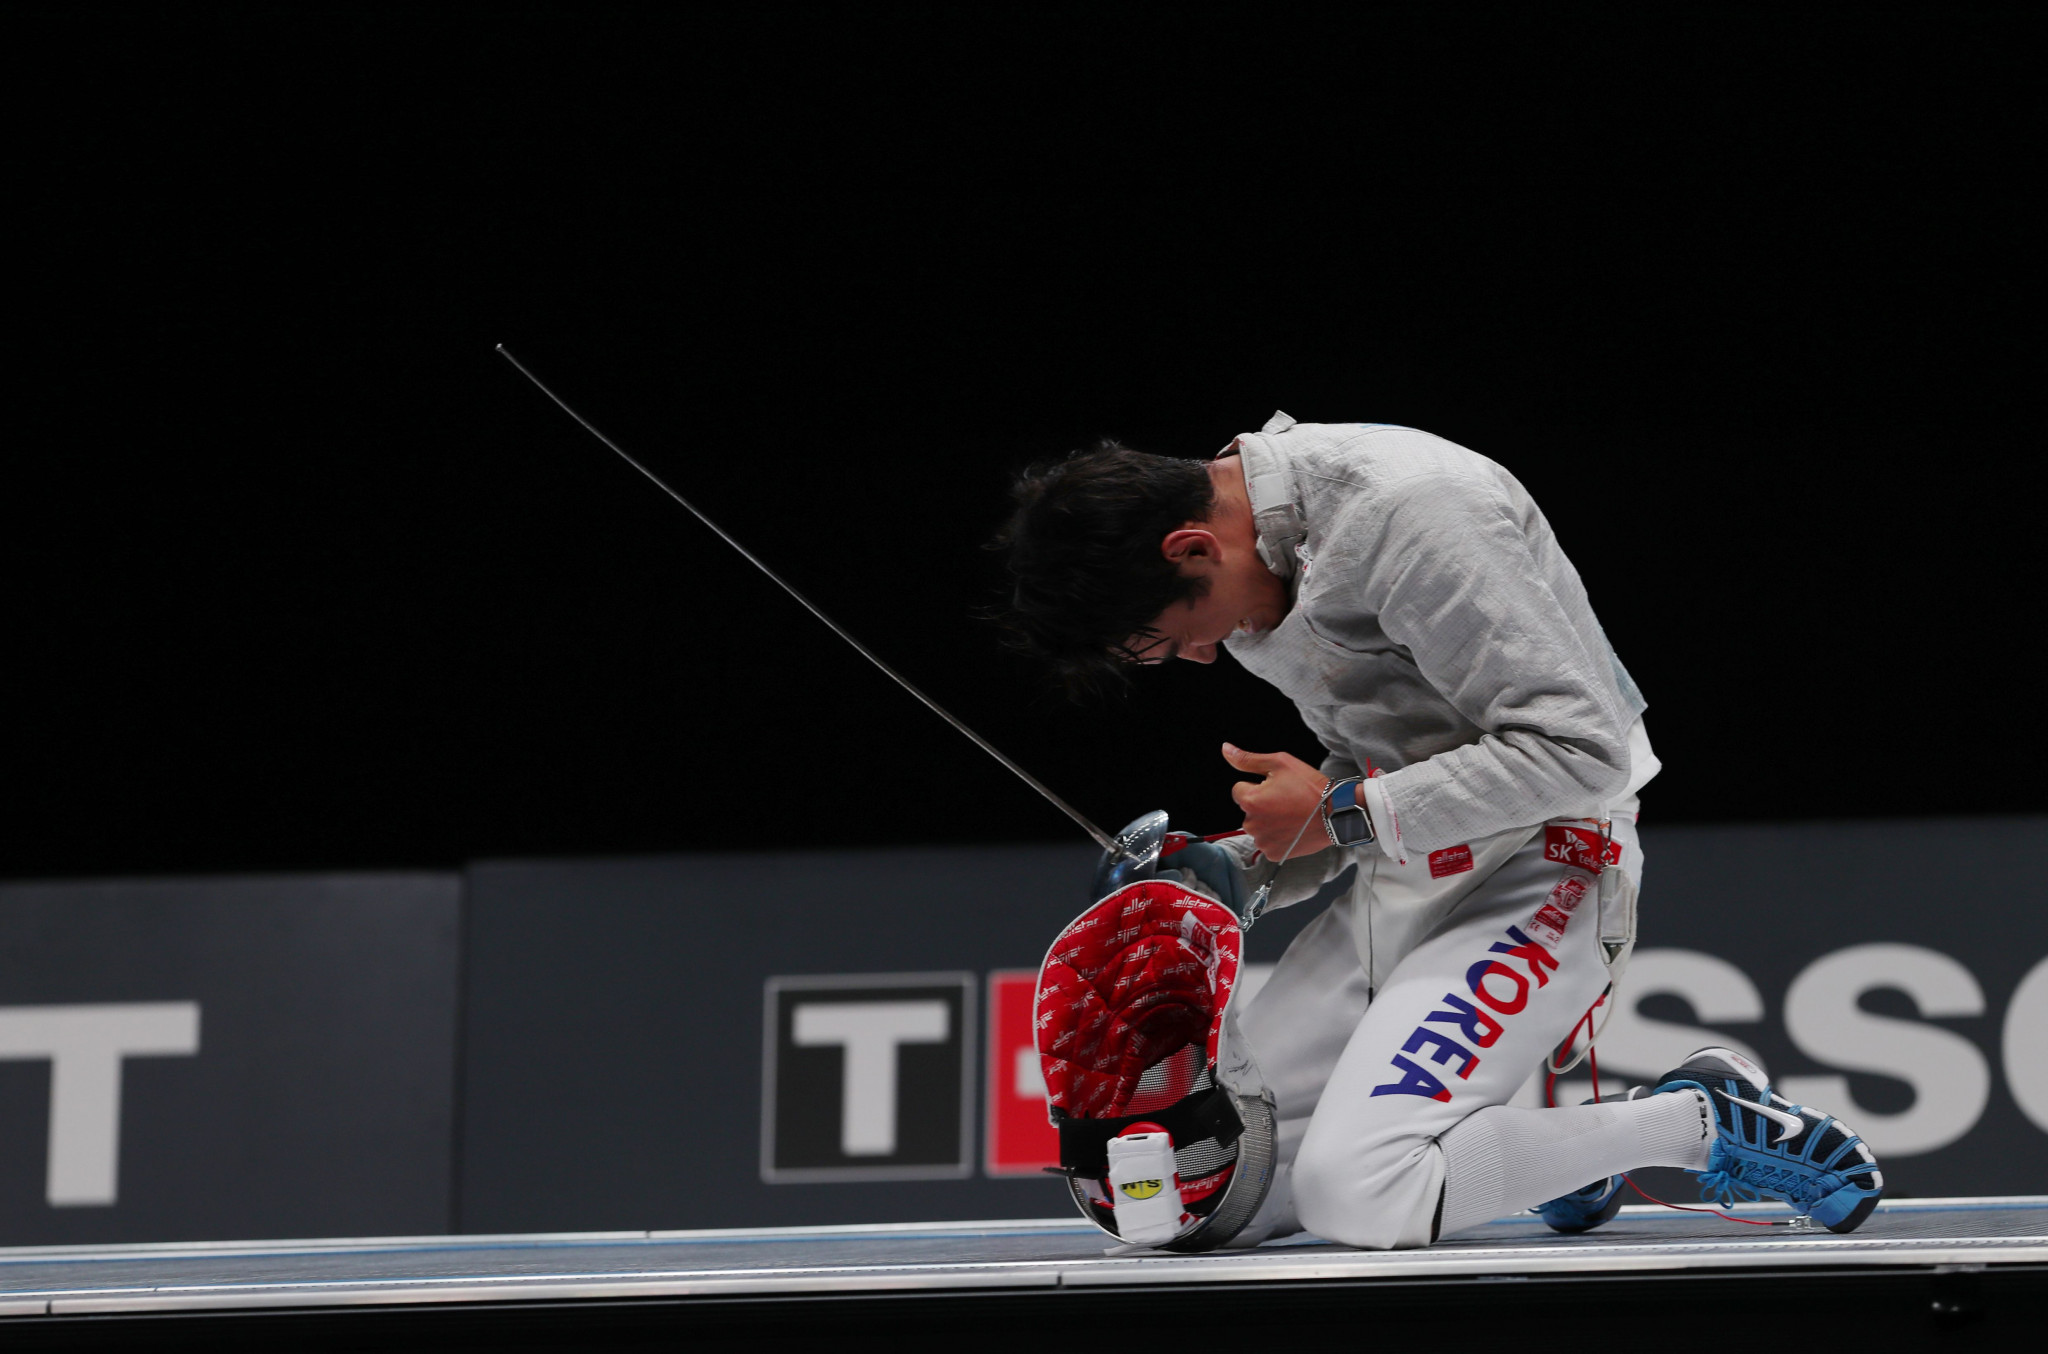 South Korea's Kim Jung-Hwan helped his country retain their title in the men's team sabre event at the FIE Fencing World Championships today ©Getty Images